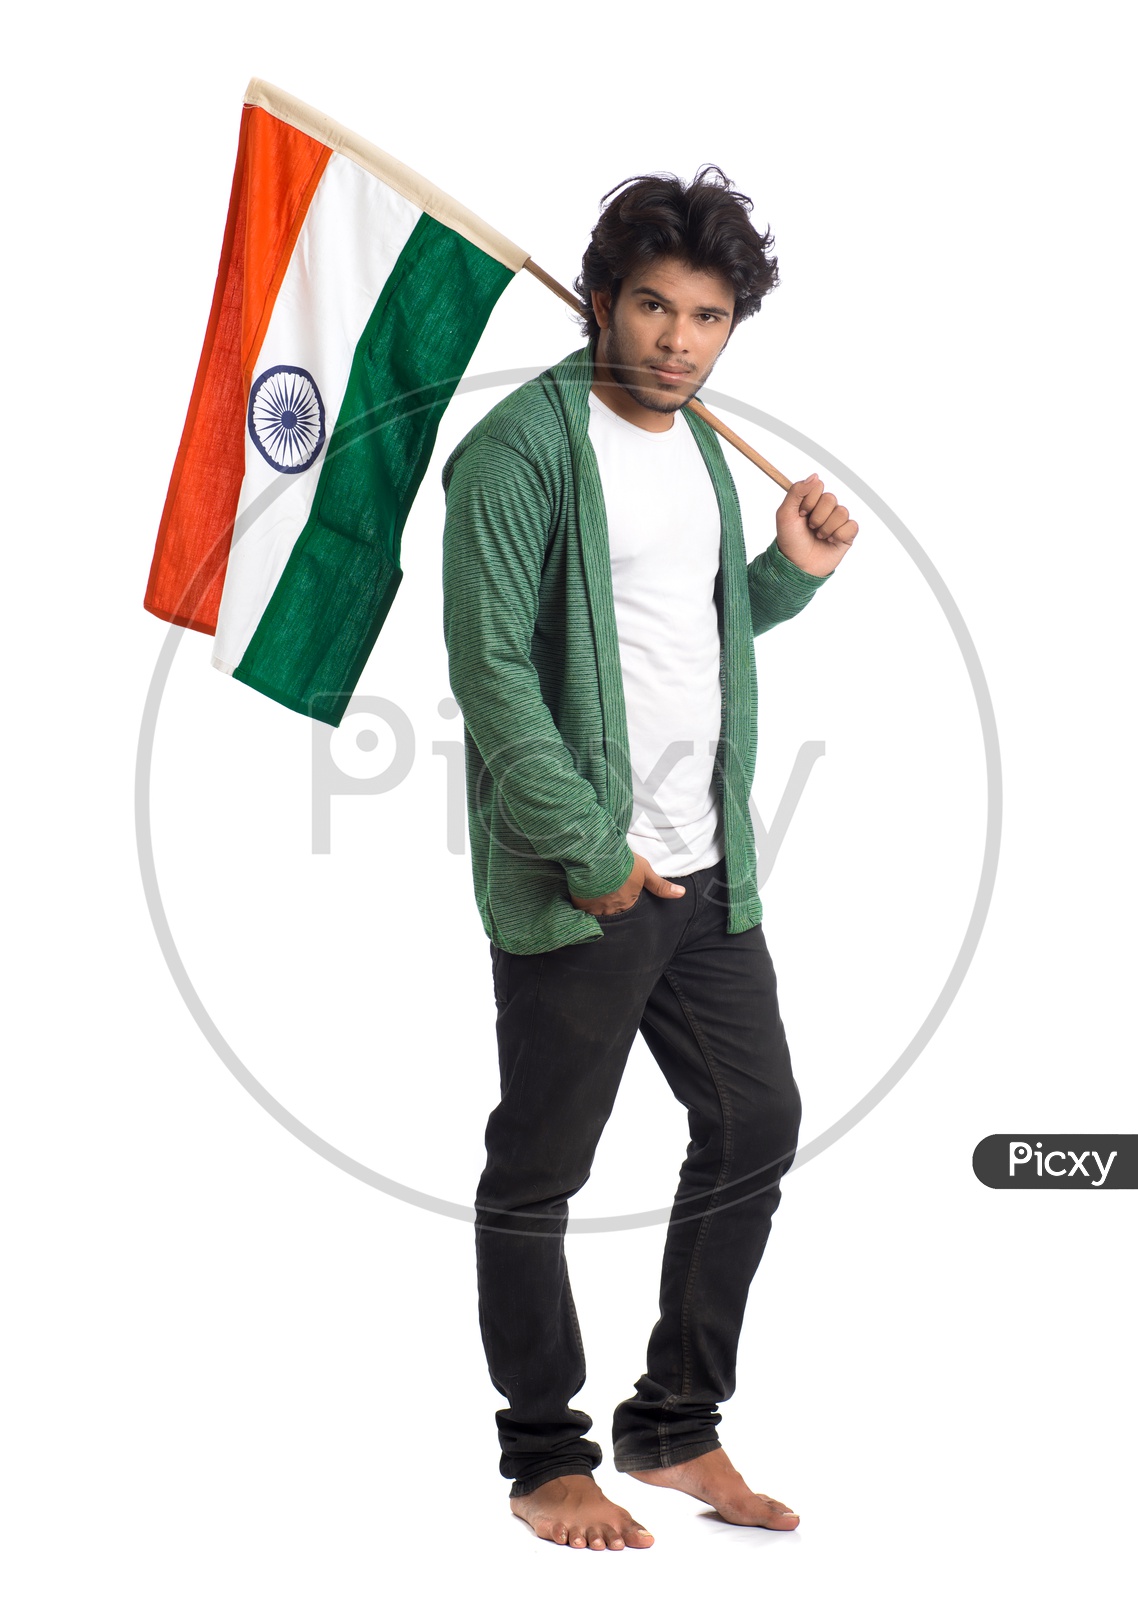 A Young Indian man Holding  Indian National Flag ( Tri Color )  In Hands And  Posing   Over a White Isolated Background